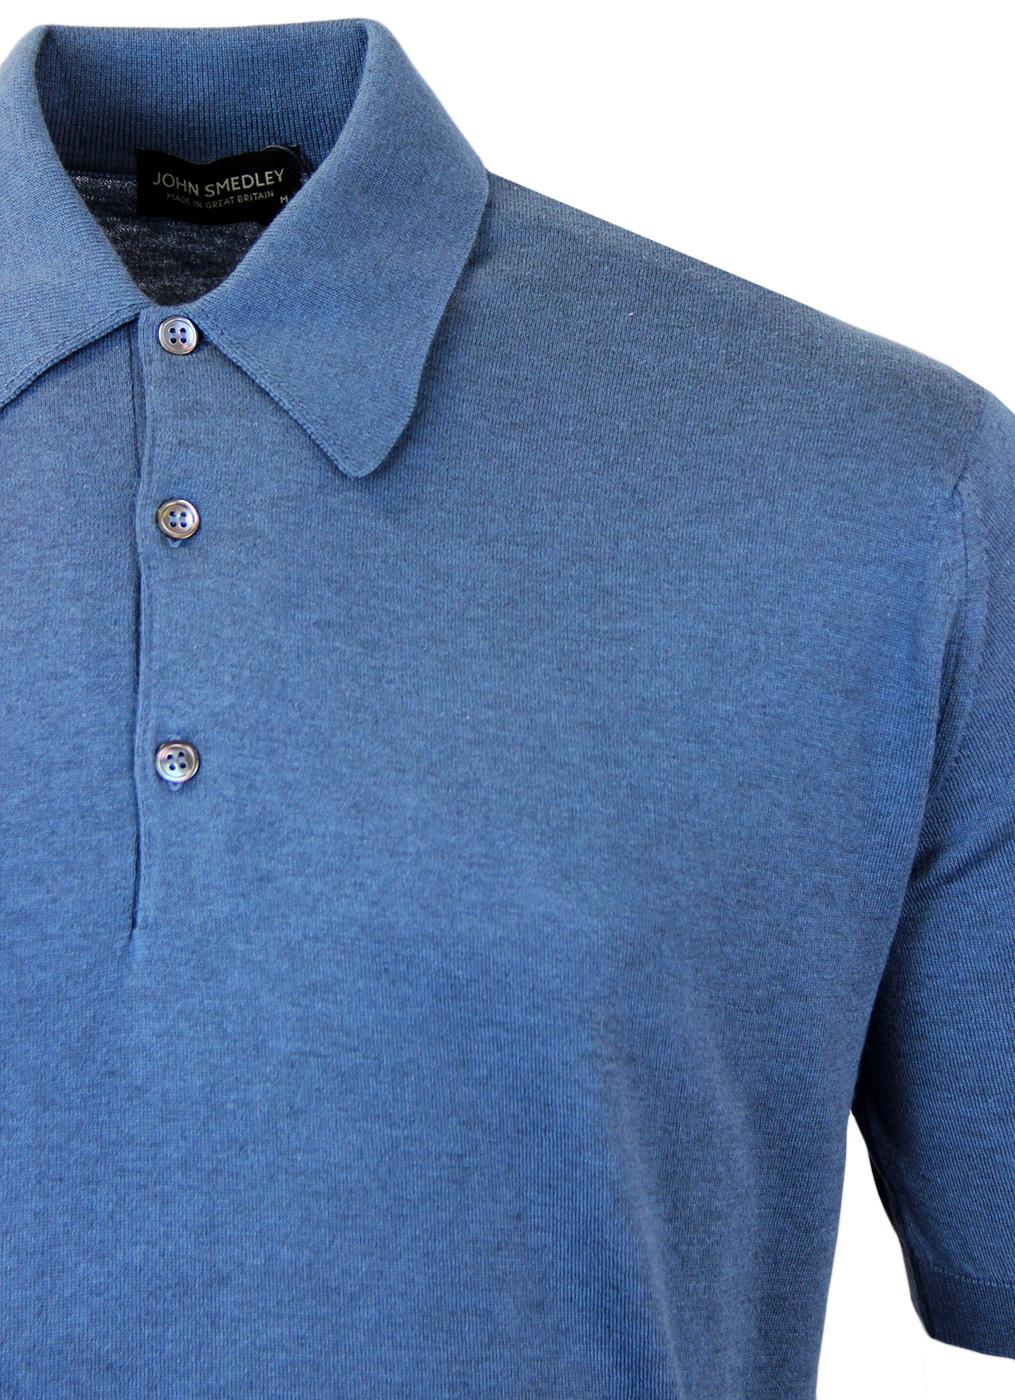 JOHN SMEDLEY Isis Retro 60s Mod Classic Fit Knit Polo Baltic Blue